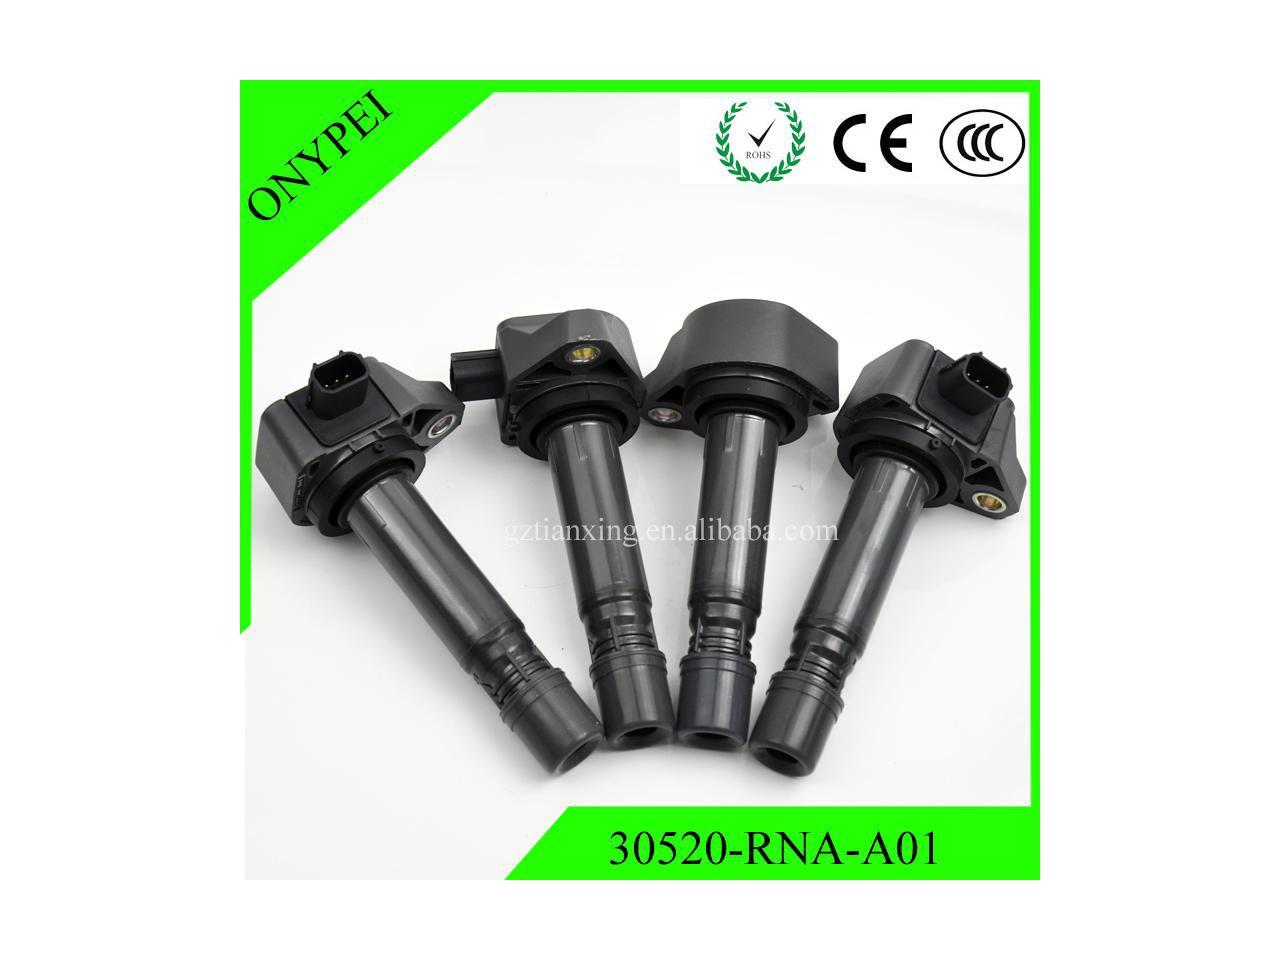 4 pcs 30520RNAA01 099700101 Ignition Coil For Honda